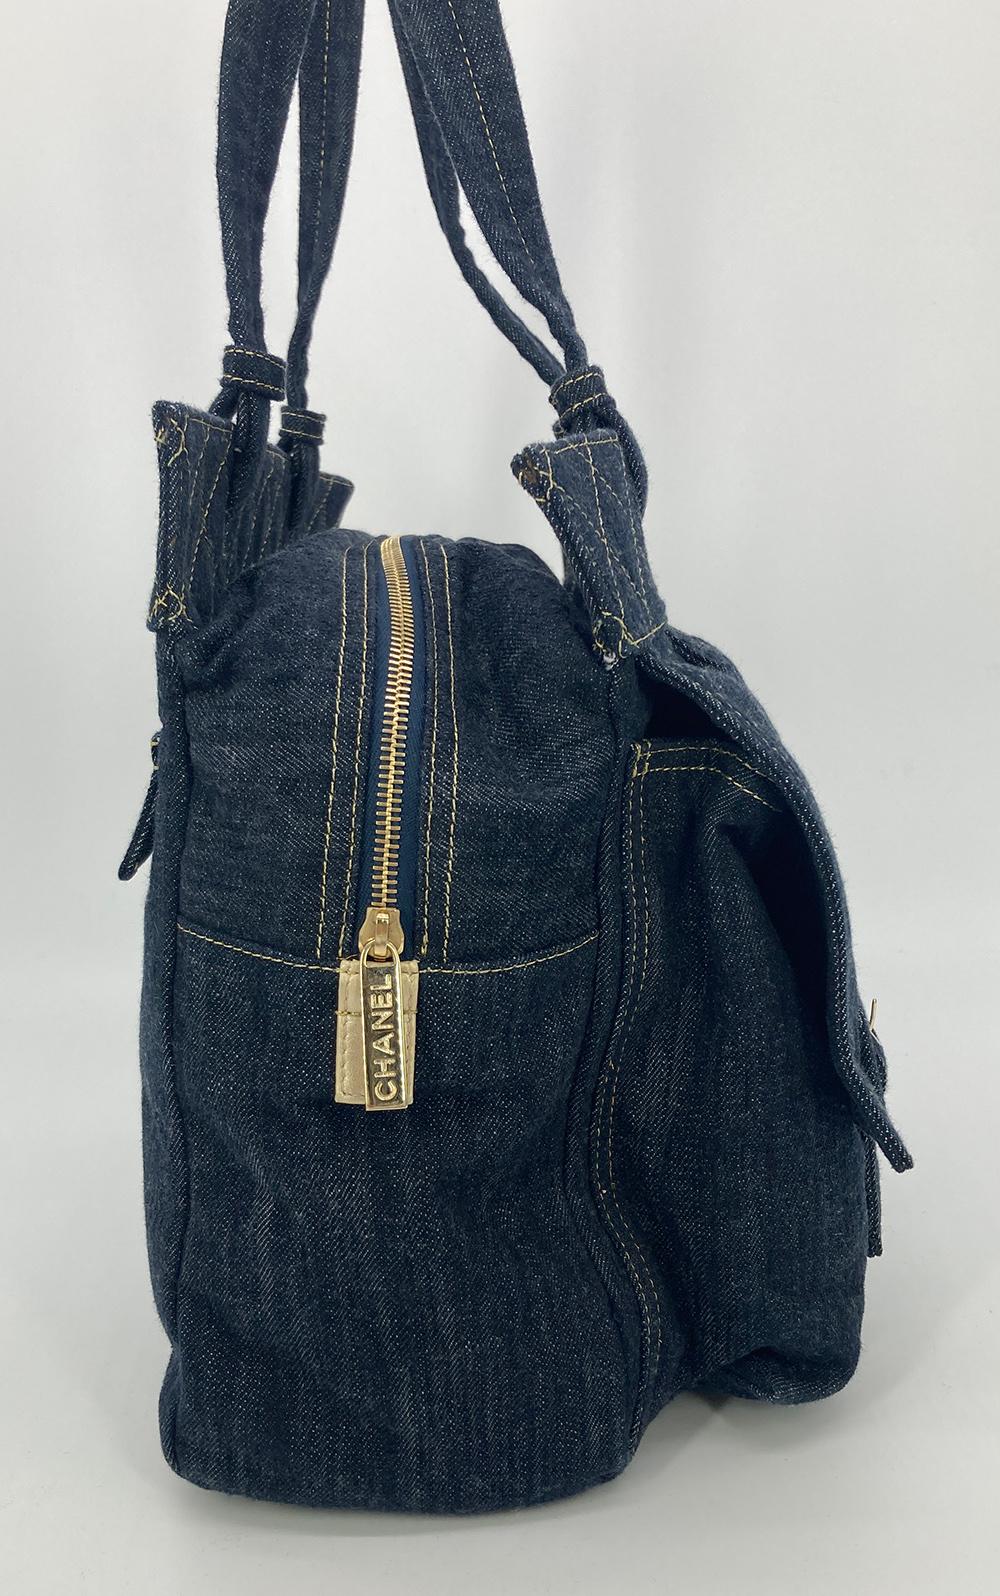 Chanel Denim Double Pocket Tote in excellent condition. Blue jean denim with gold top stitching and matte gold hardware. Double front top flap pockets with snap closures. Backside zip pocket. 2 exterior side slit pockets. Centered zip closure opens